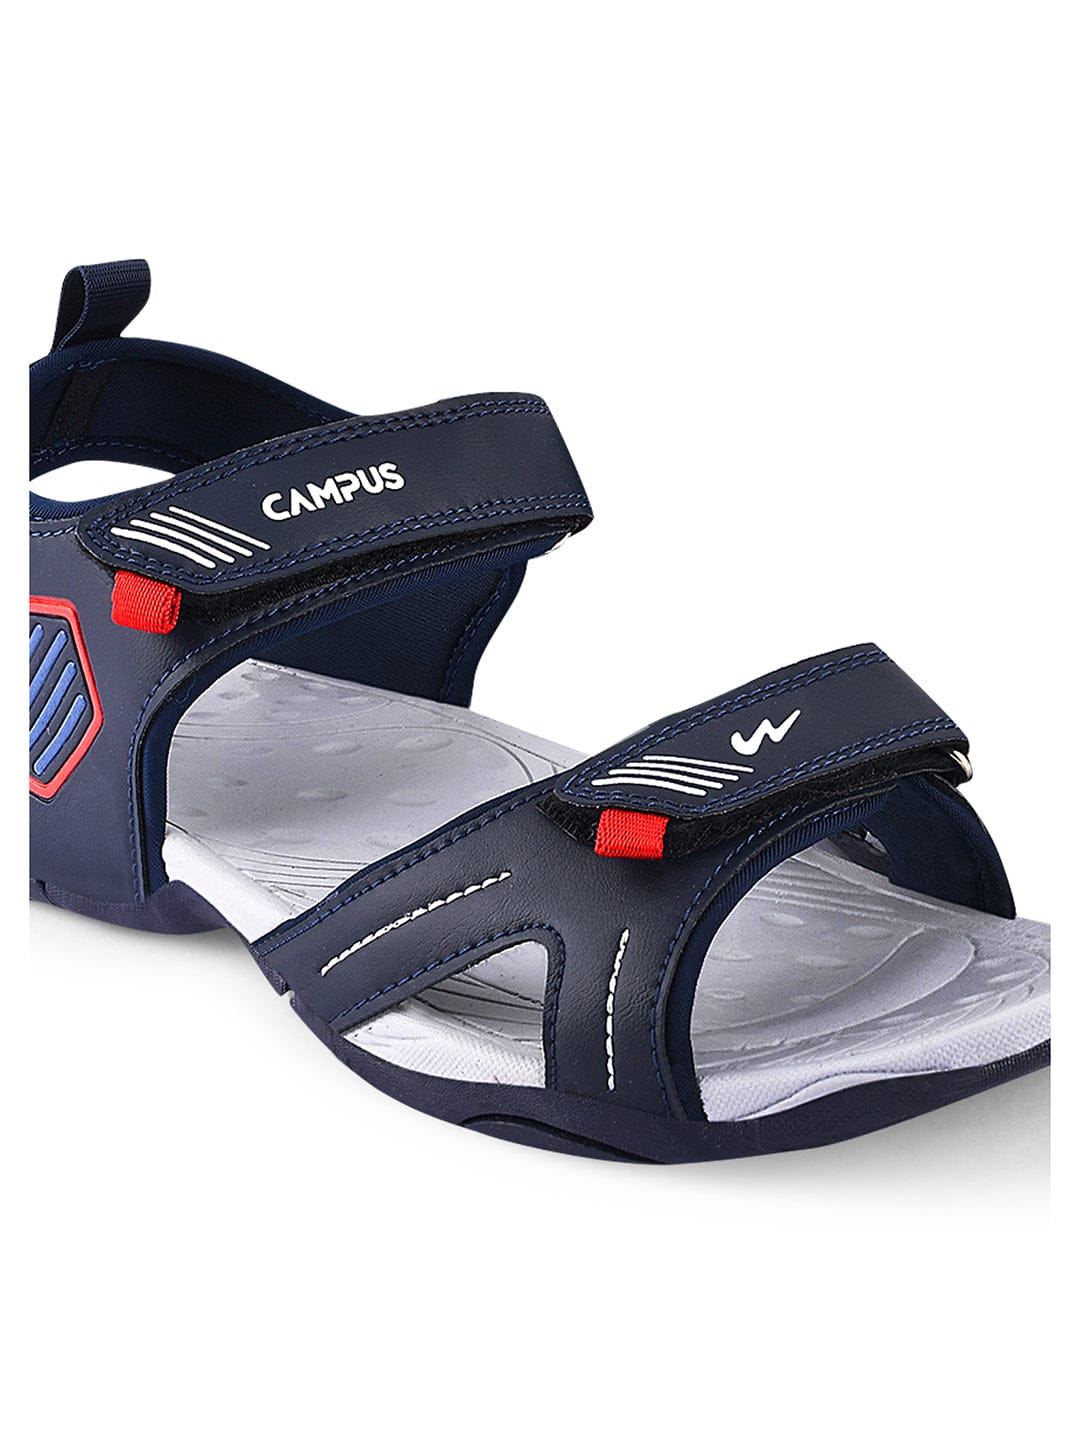 Buy Sandals For Men: Gc-22118-Blk-Red | Campus Shoes